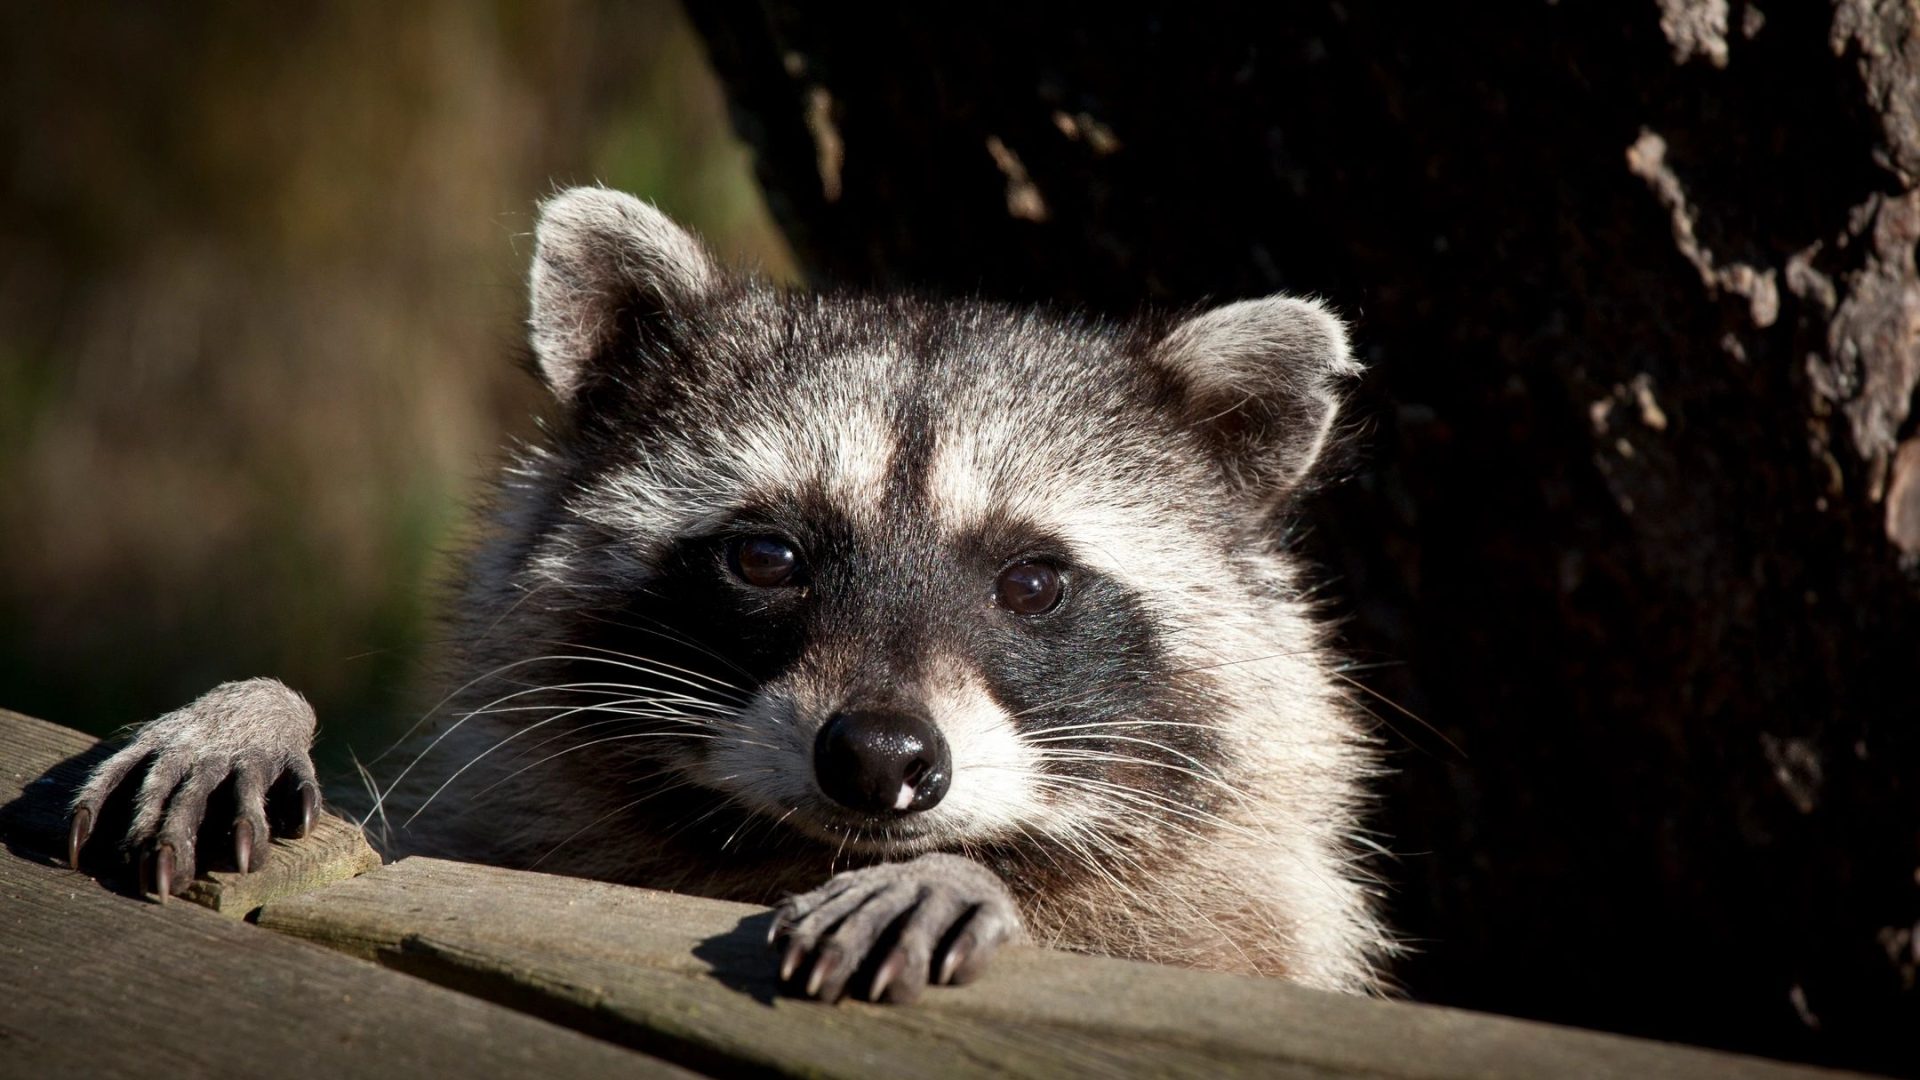 A racoon near a tree resting front paws on wood.